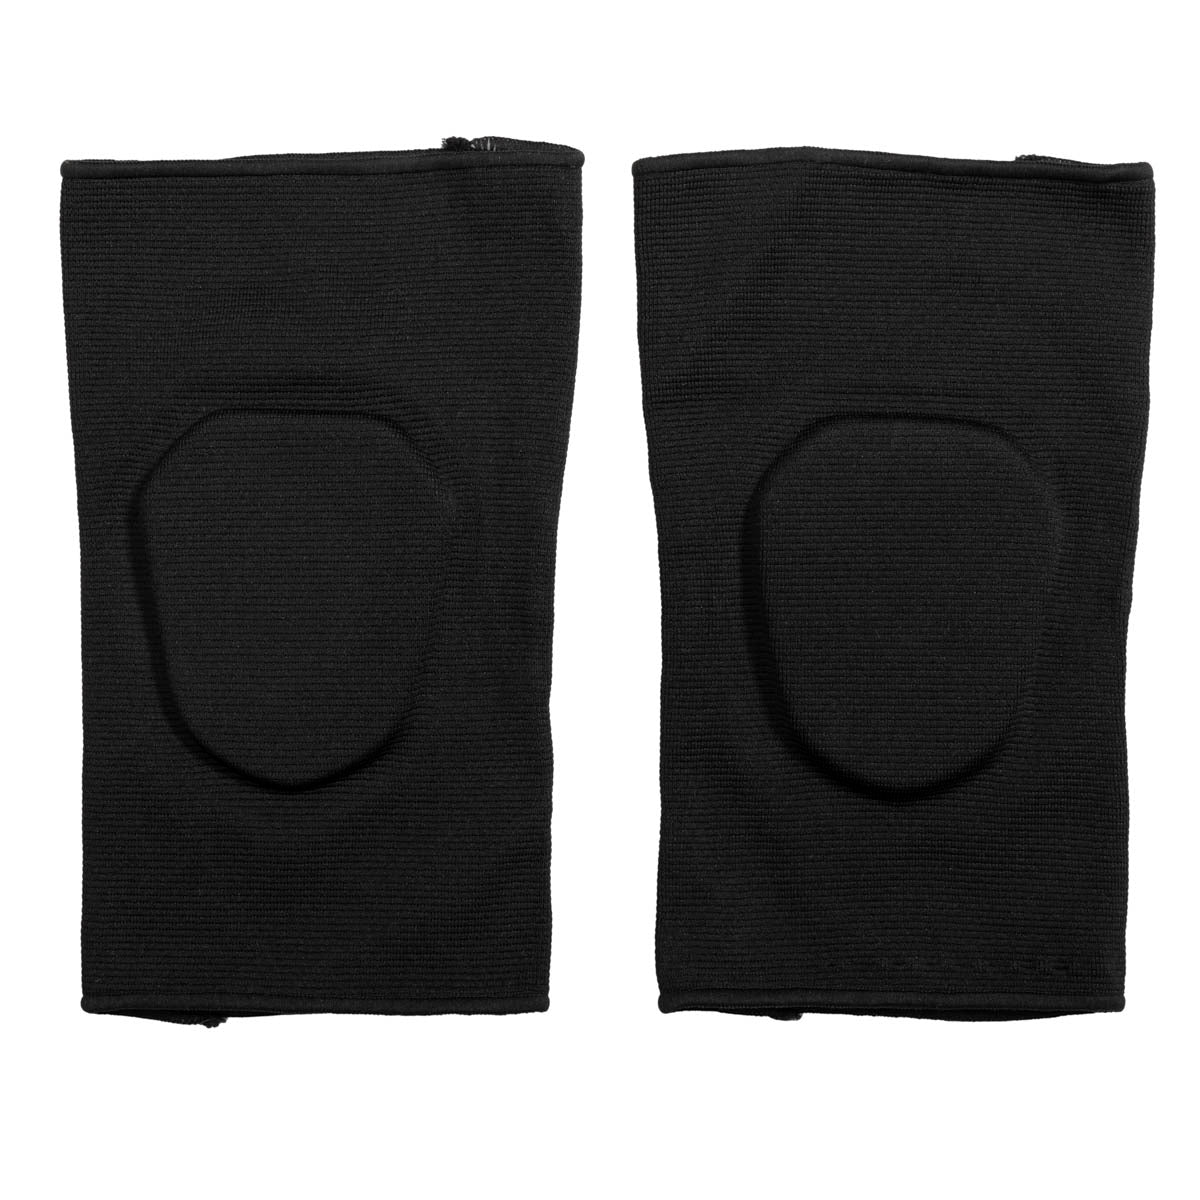 Versatile Knee Pads Multiple Colors for Workout, Rollerblading, Halloween Costumes, and Cosplay Accessories Black